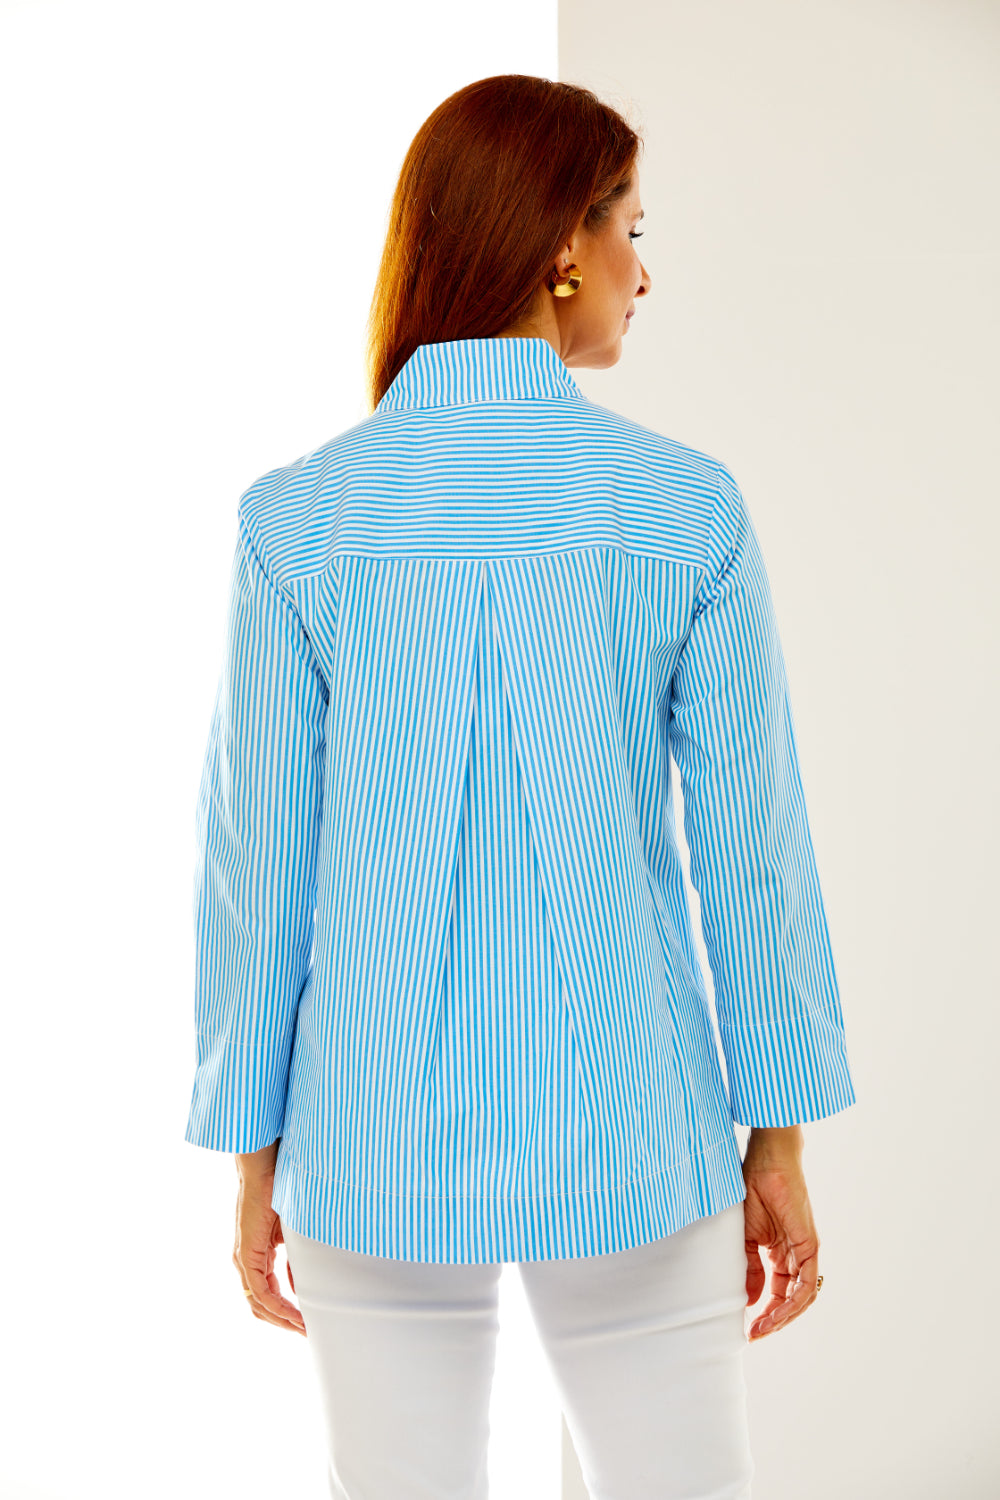 Woman in ocean and white stripe shirt